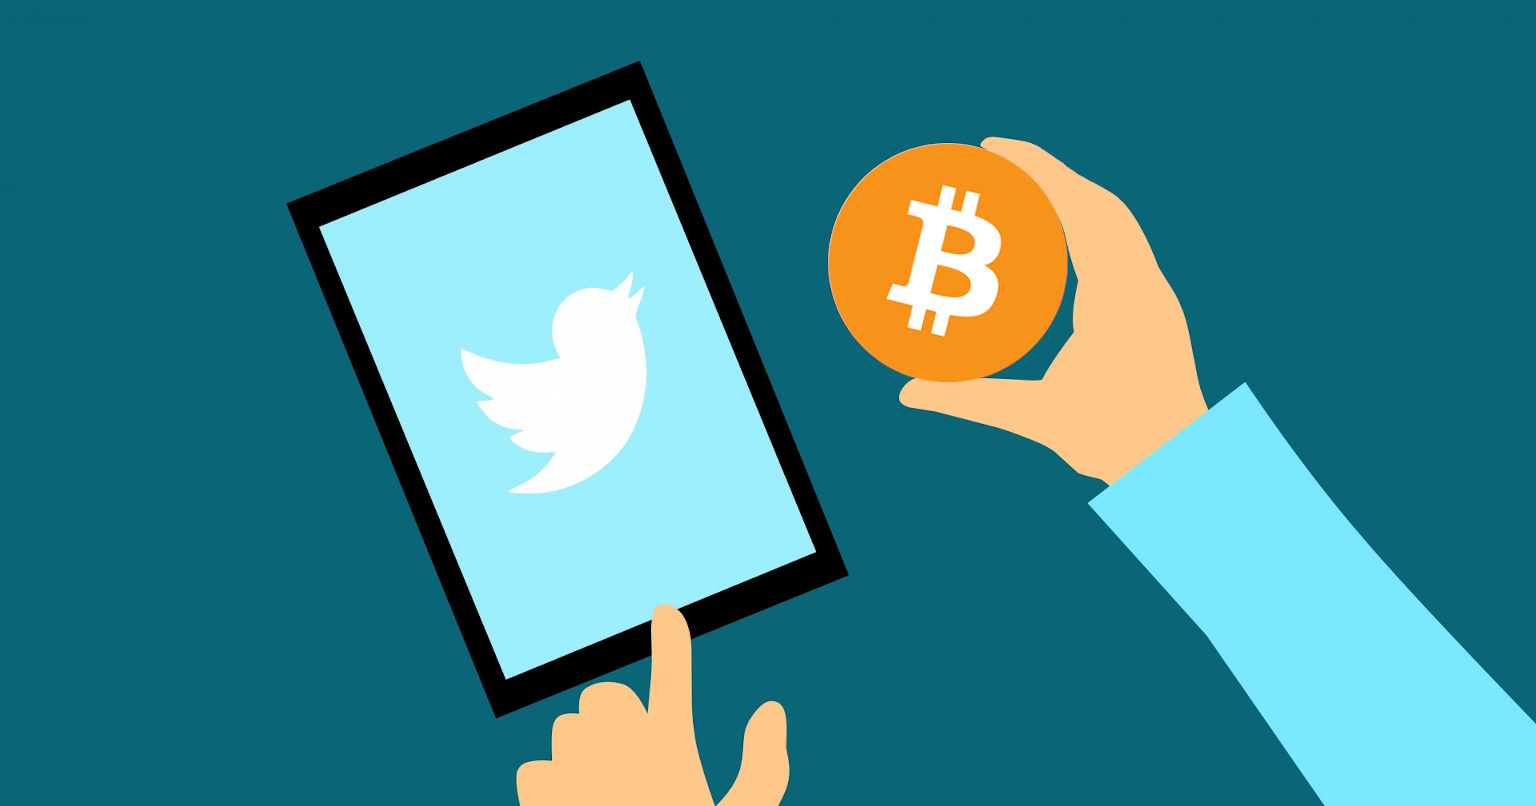 Twitter starts rolling out BTC tips but does it really?